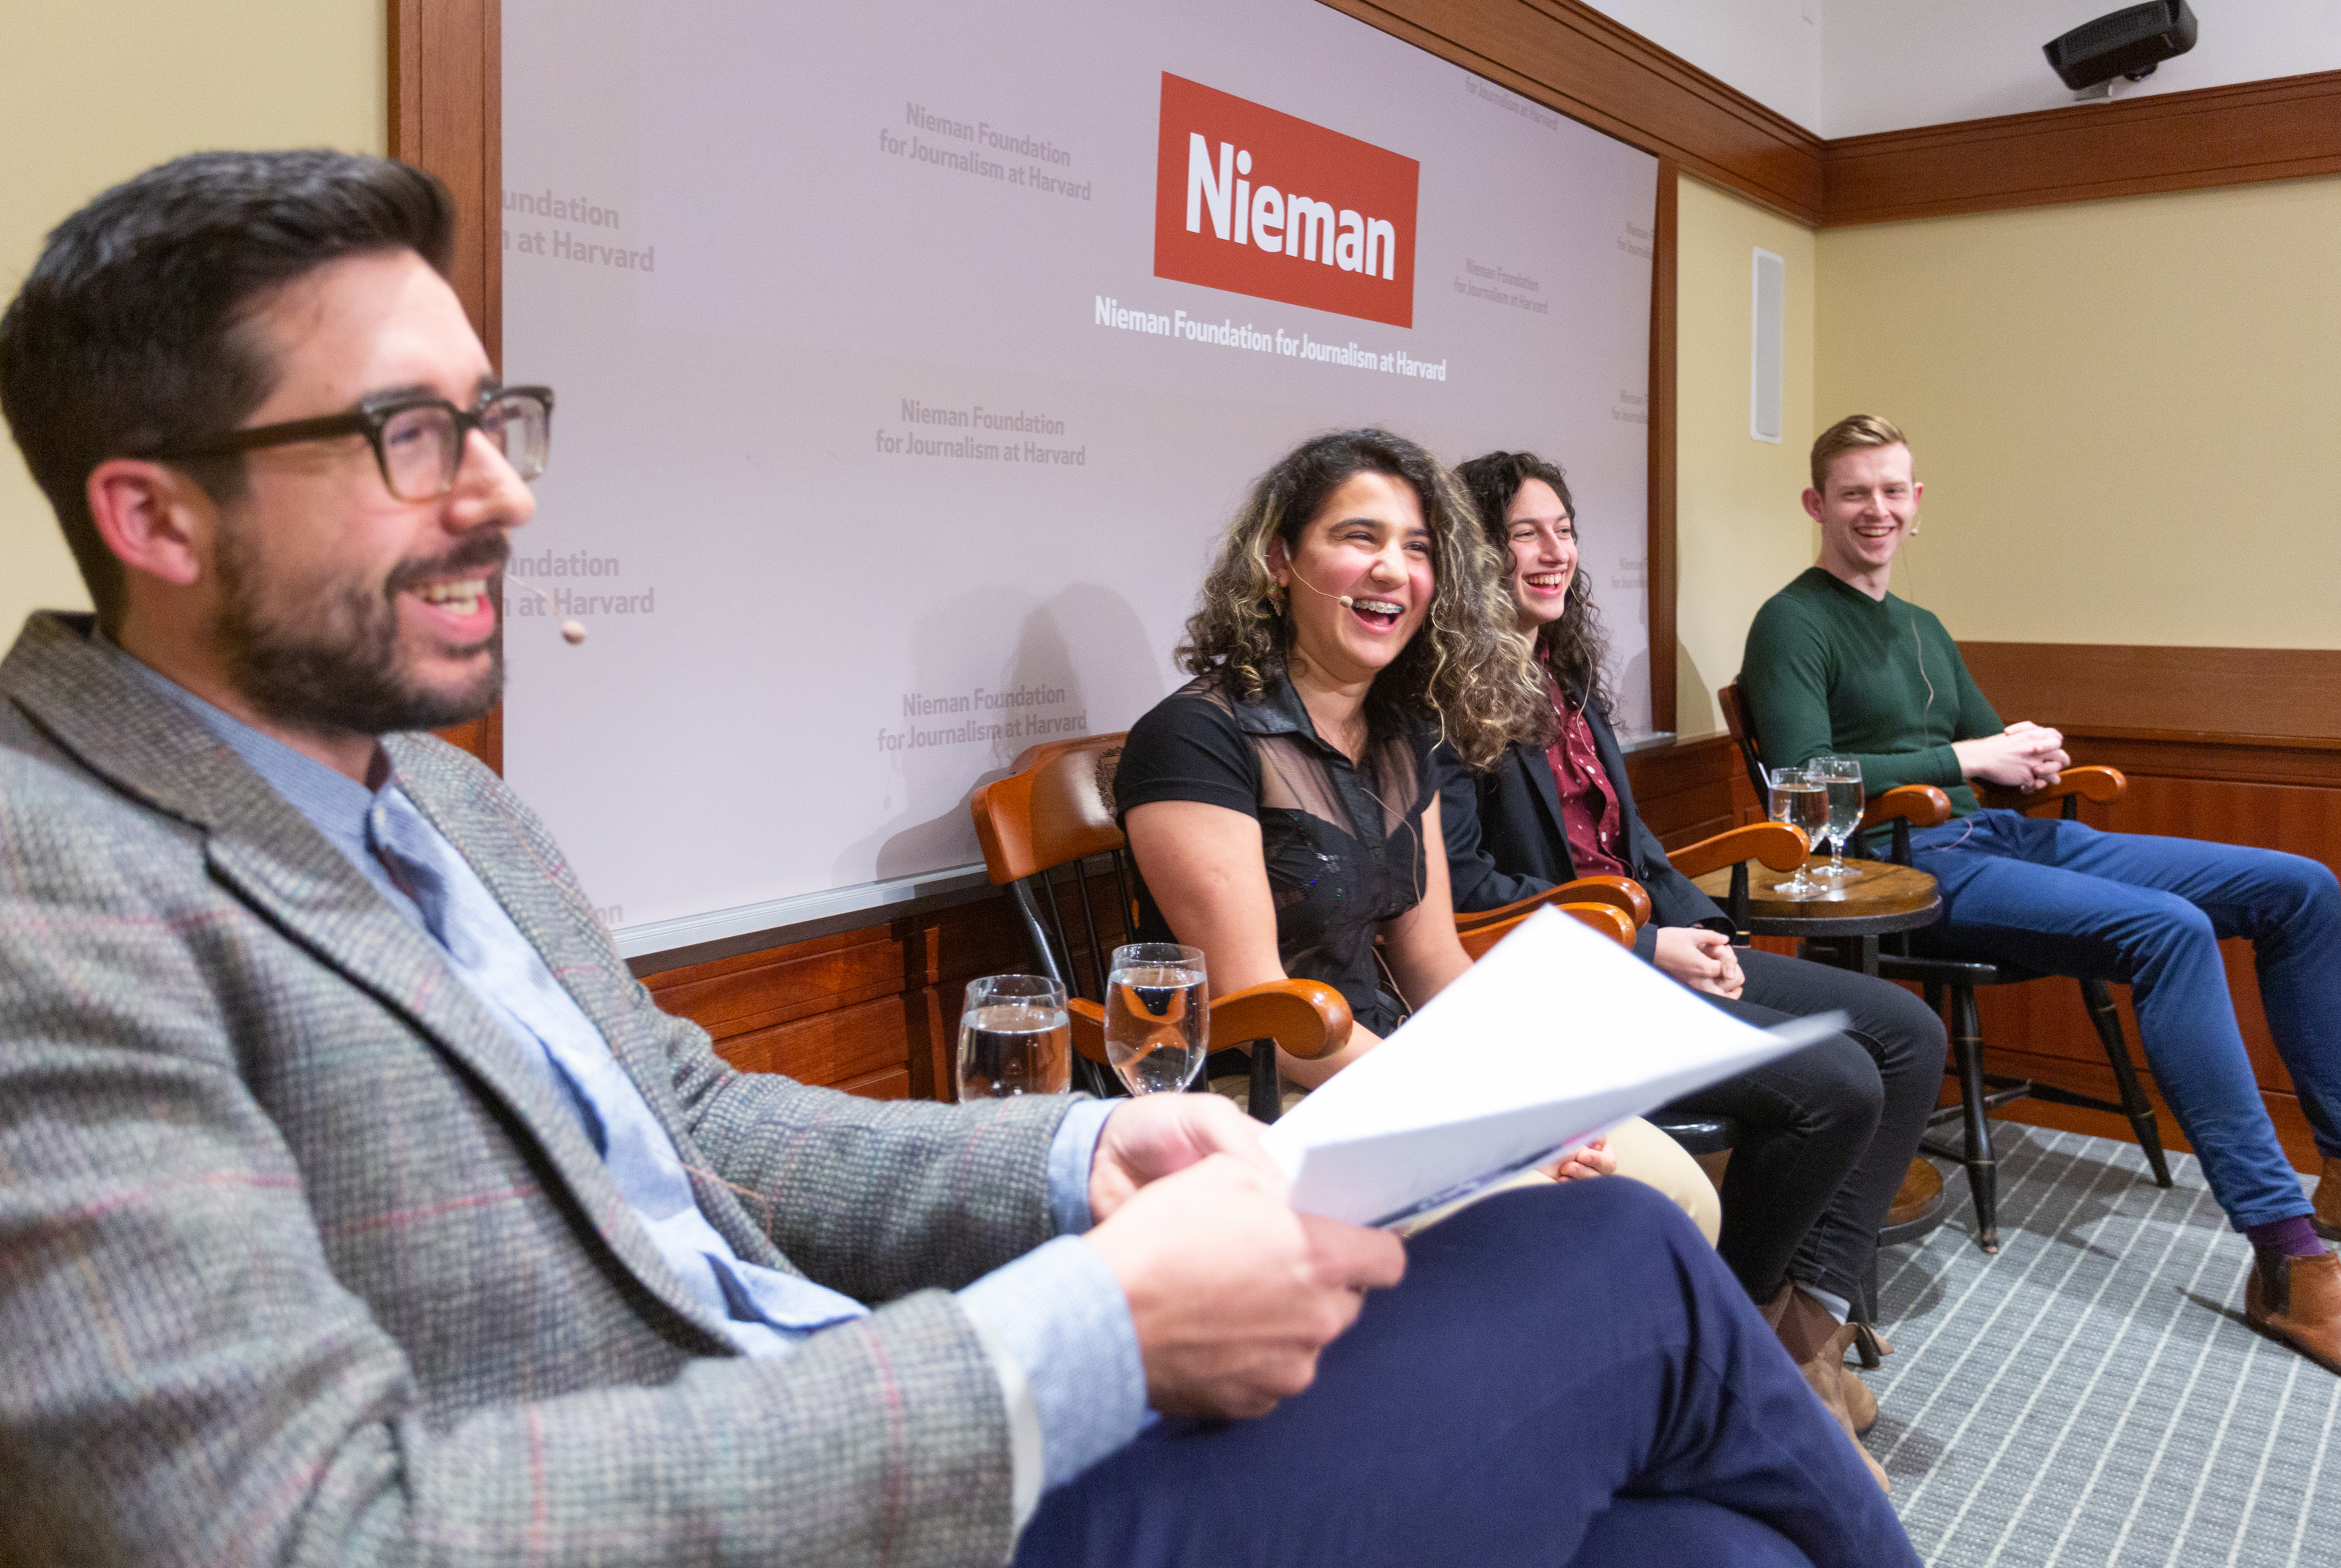 Moderator Aleszu Bajak (left) leads a panel with youth climate activists Saya Ameli Hajebi, Amalia Hochman and James Healy during Nieman's 2019 Covering Climate Change conference